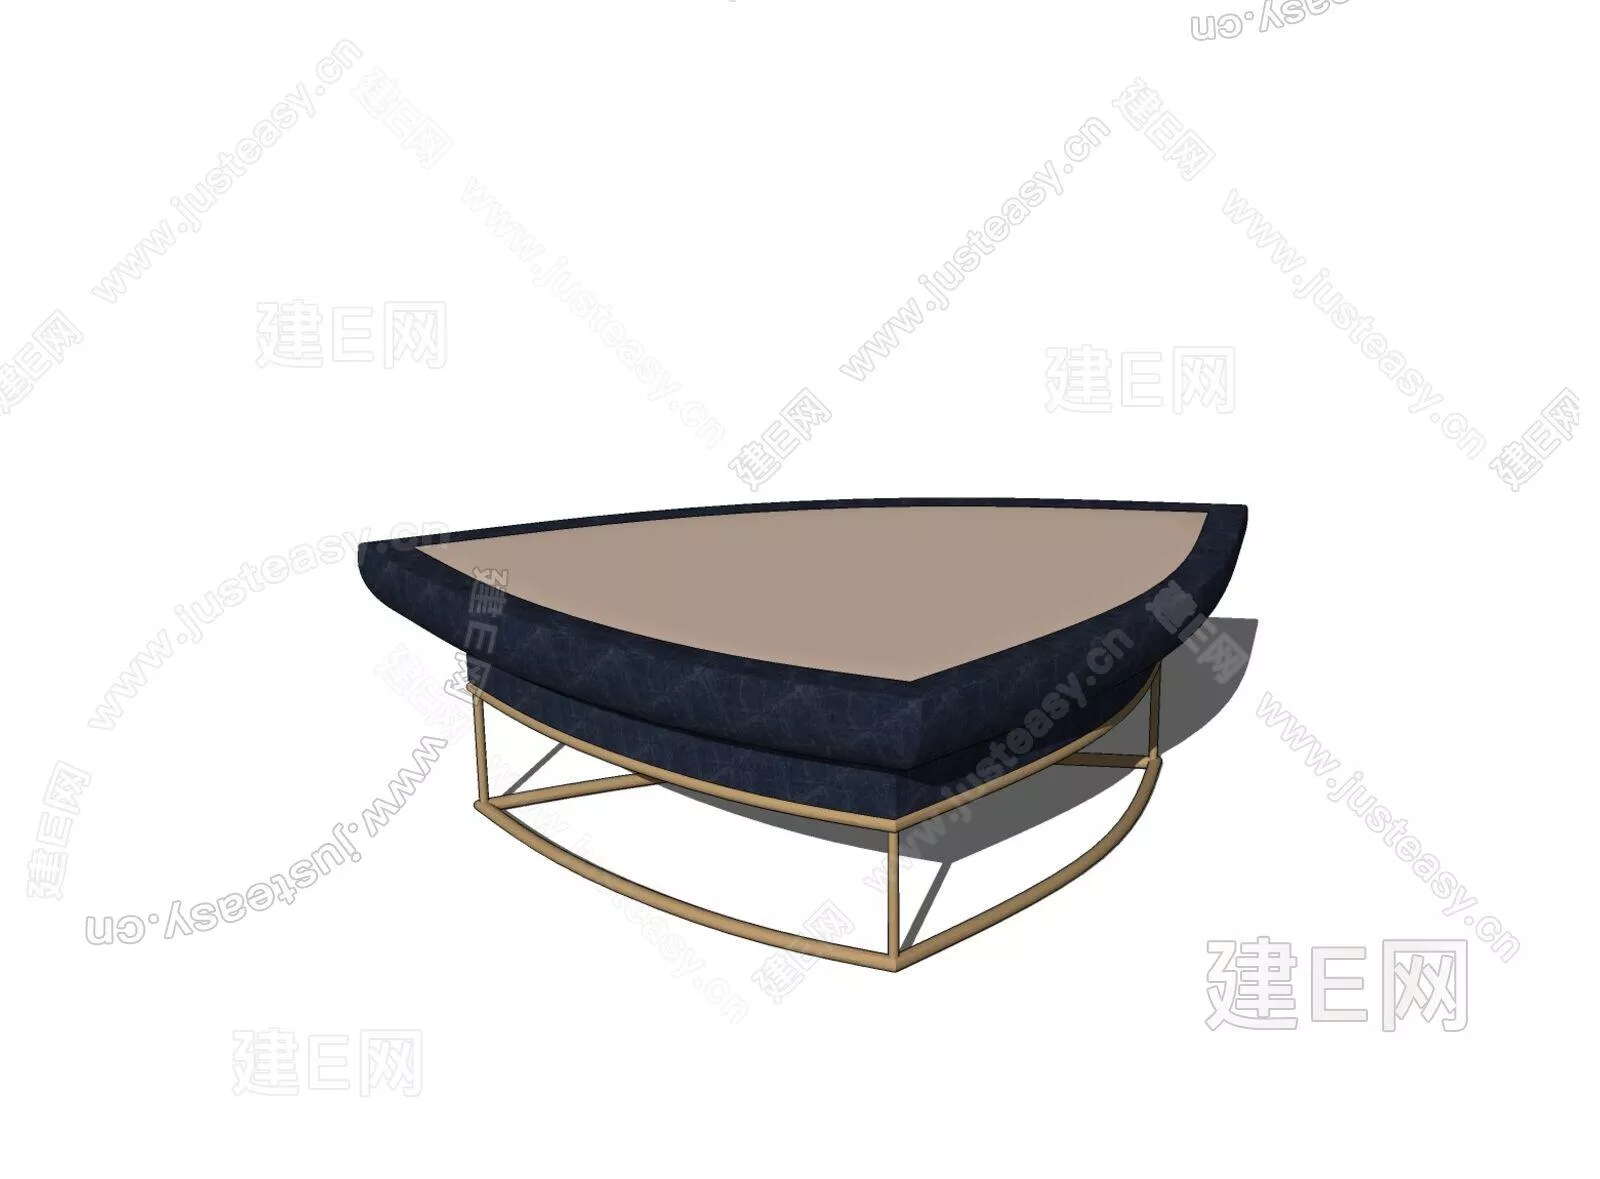 MODERN COFFEE TABLE - SKETCHUP 3D MODEL - ENSCAPE - 102122878